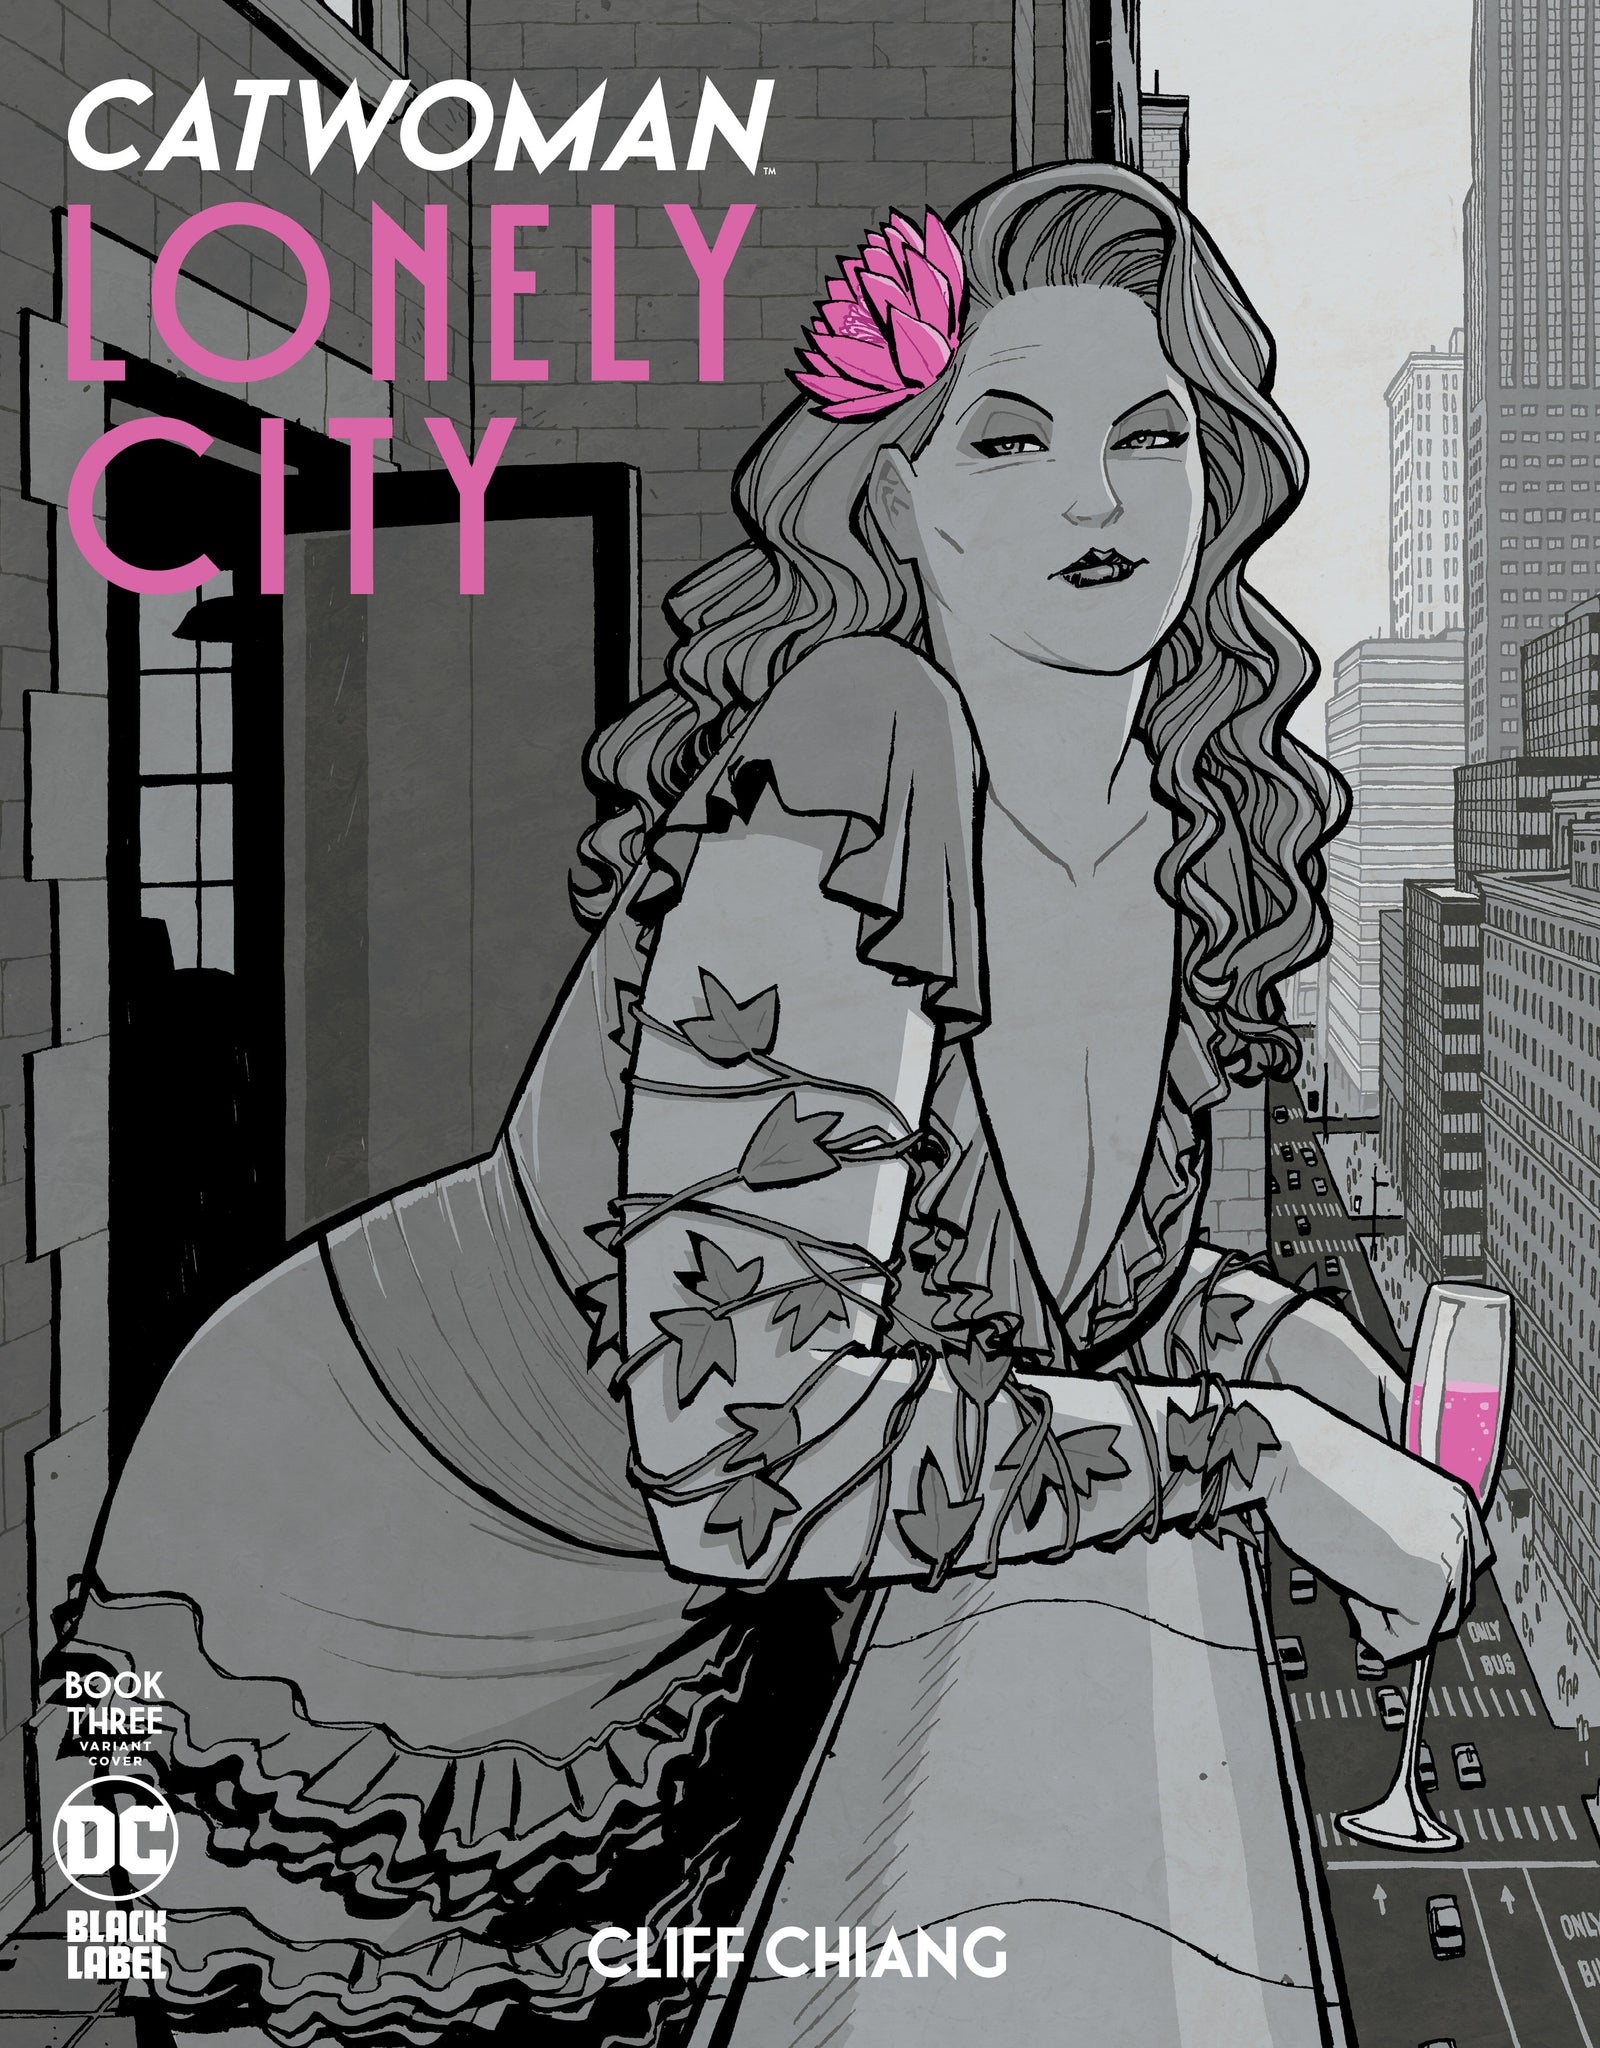 CATWOMAN LONELY CITY #3 (OF 4)